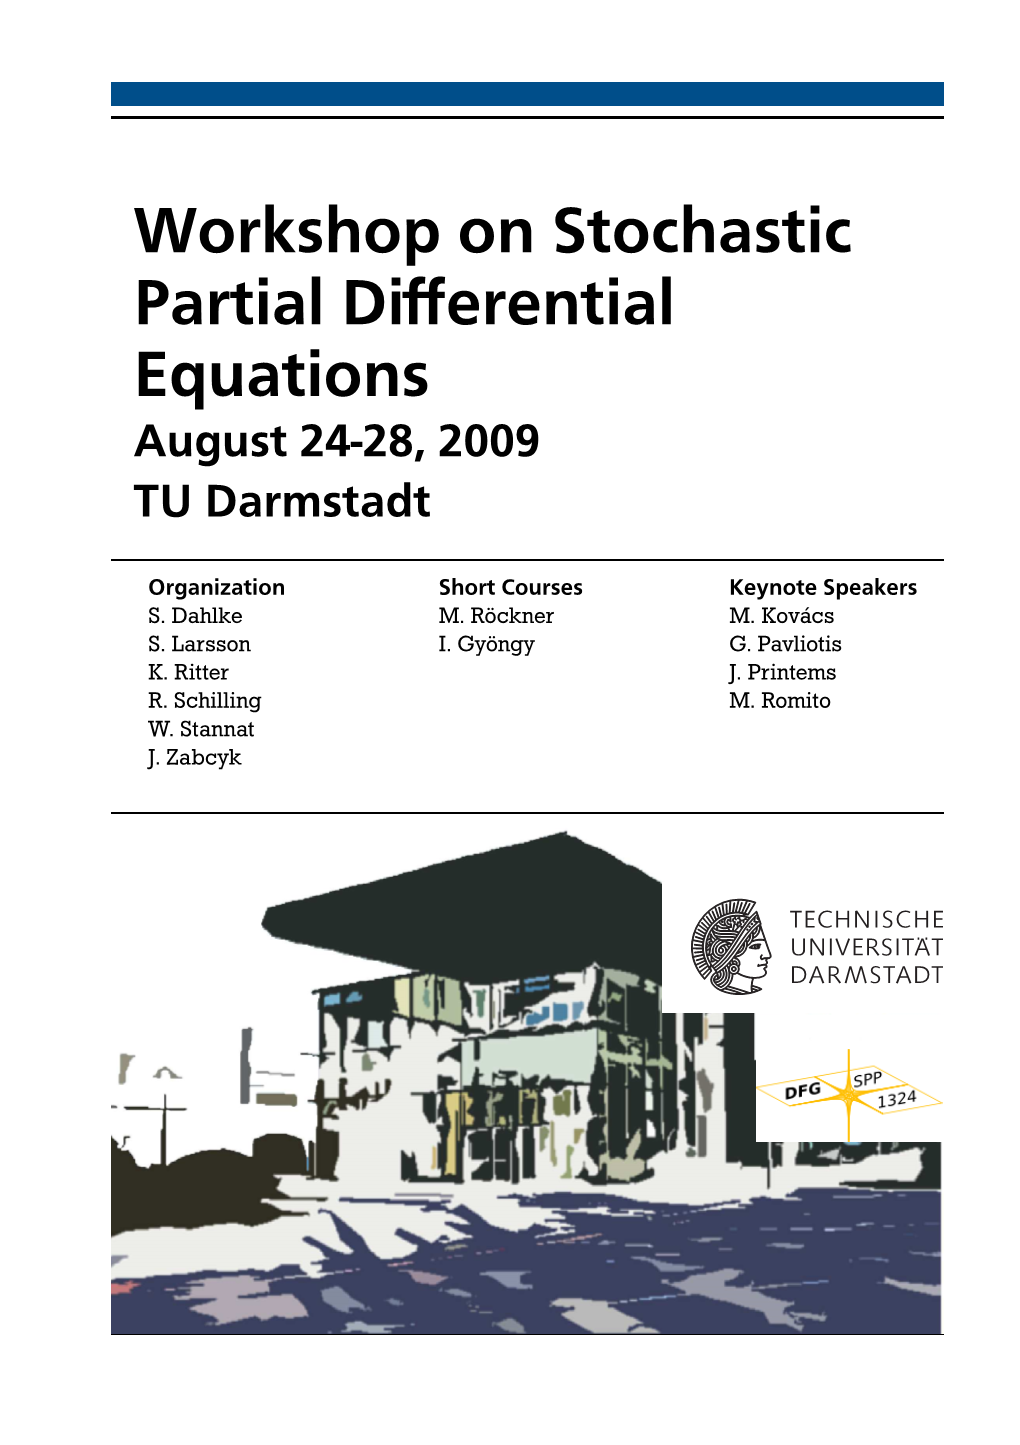 Workshop on Stochastic Partial Differential Equations